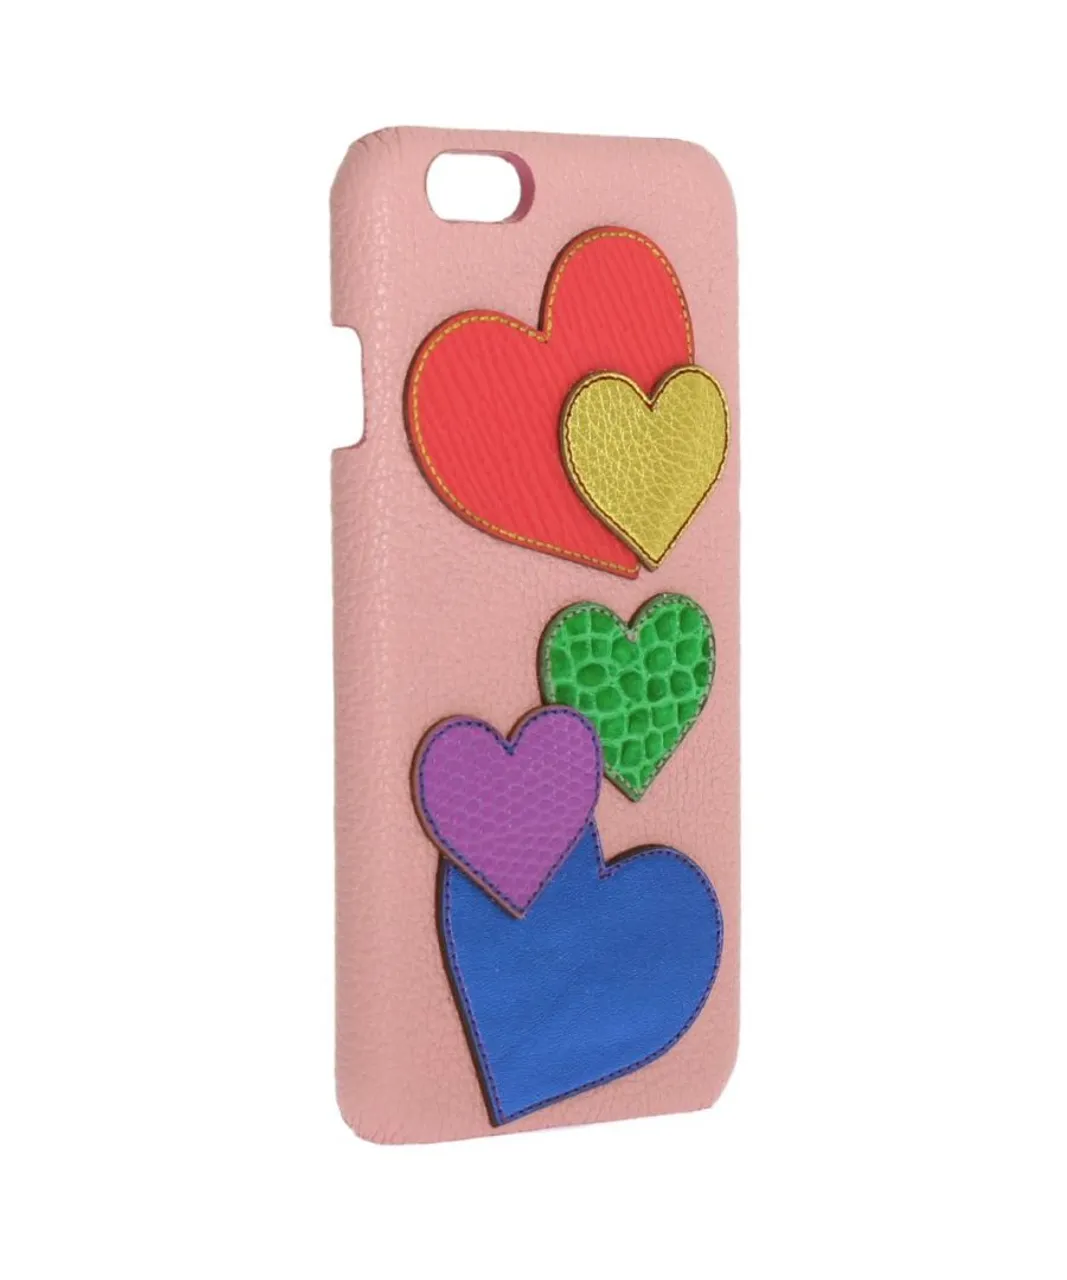 Dolce & Gabbana Womens Pink Leather Heart Phone Cover - Multicolour - One Size